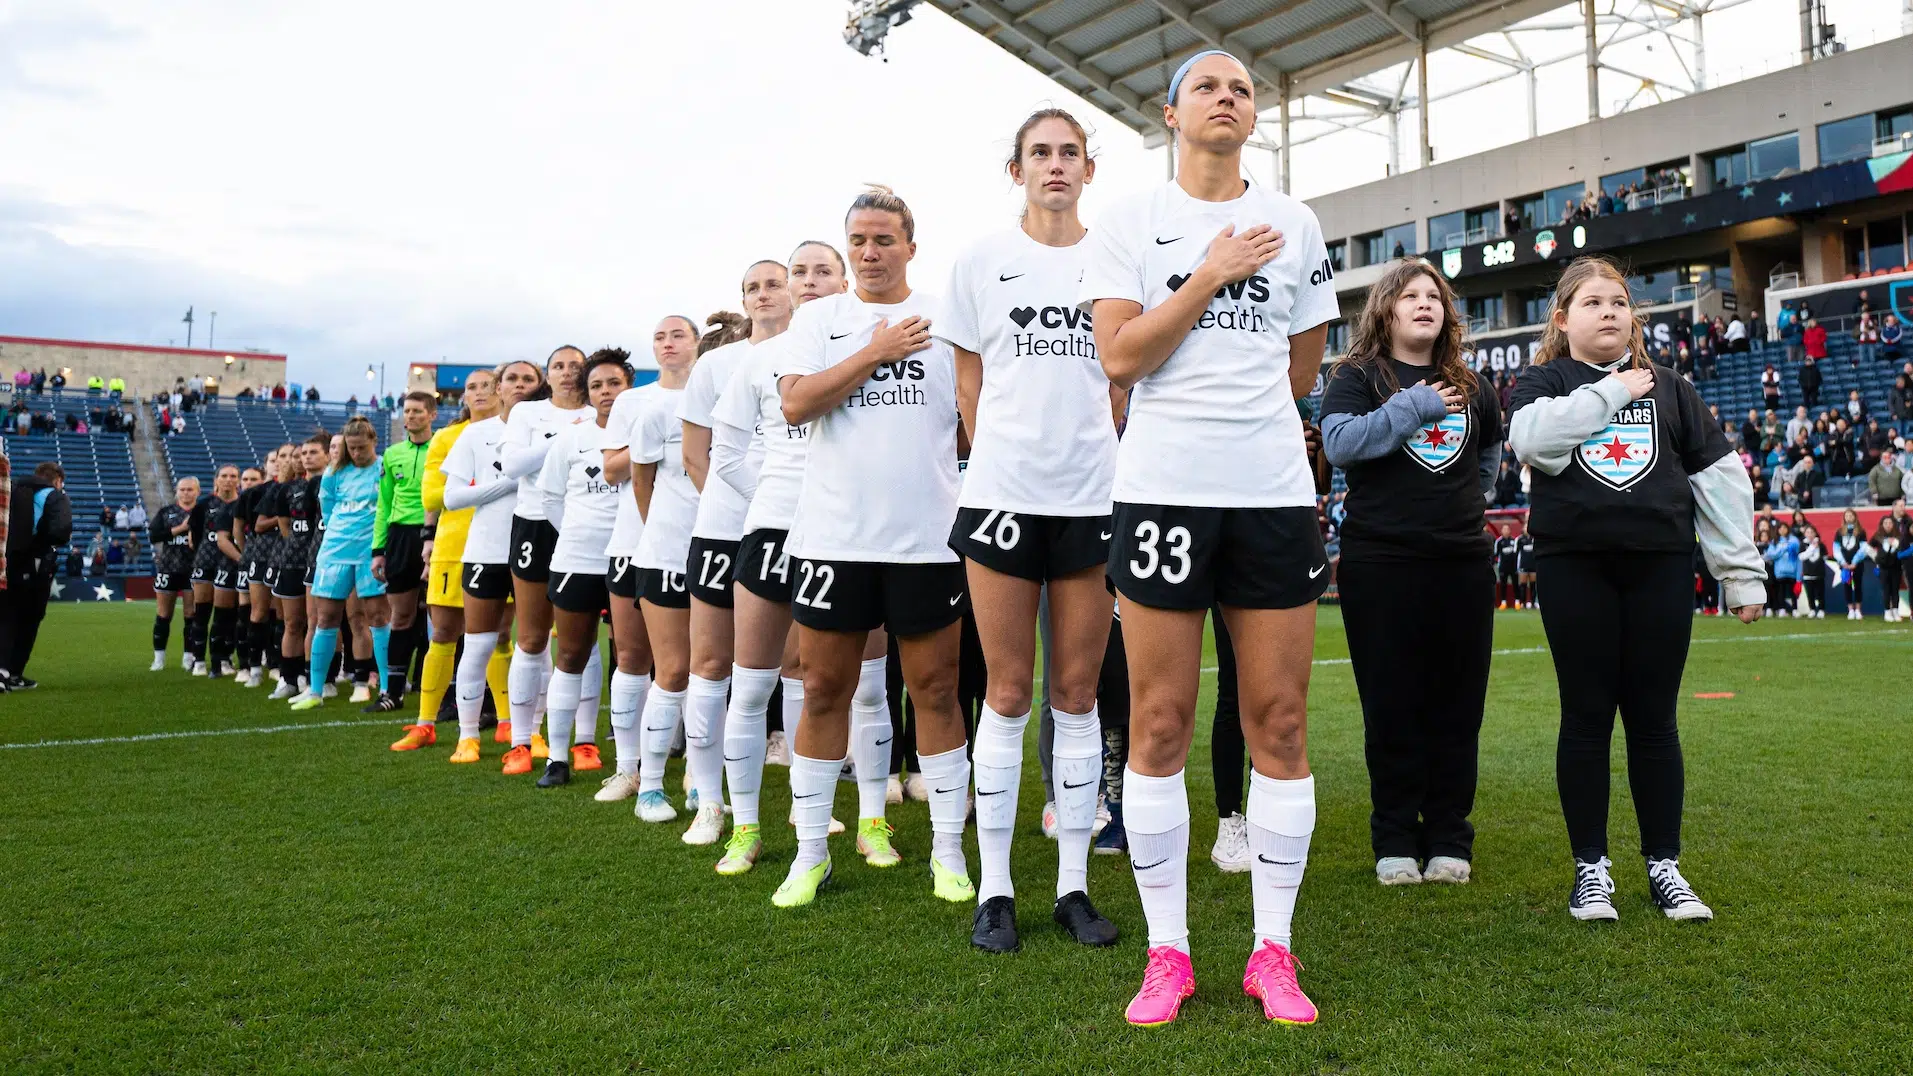 A team of soccer players in white tops, black shorts and white socks stand stoically in a line with their hands on their hearts.